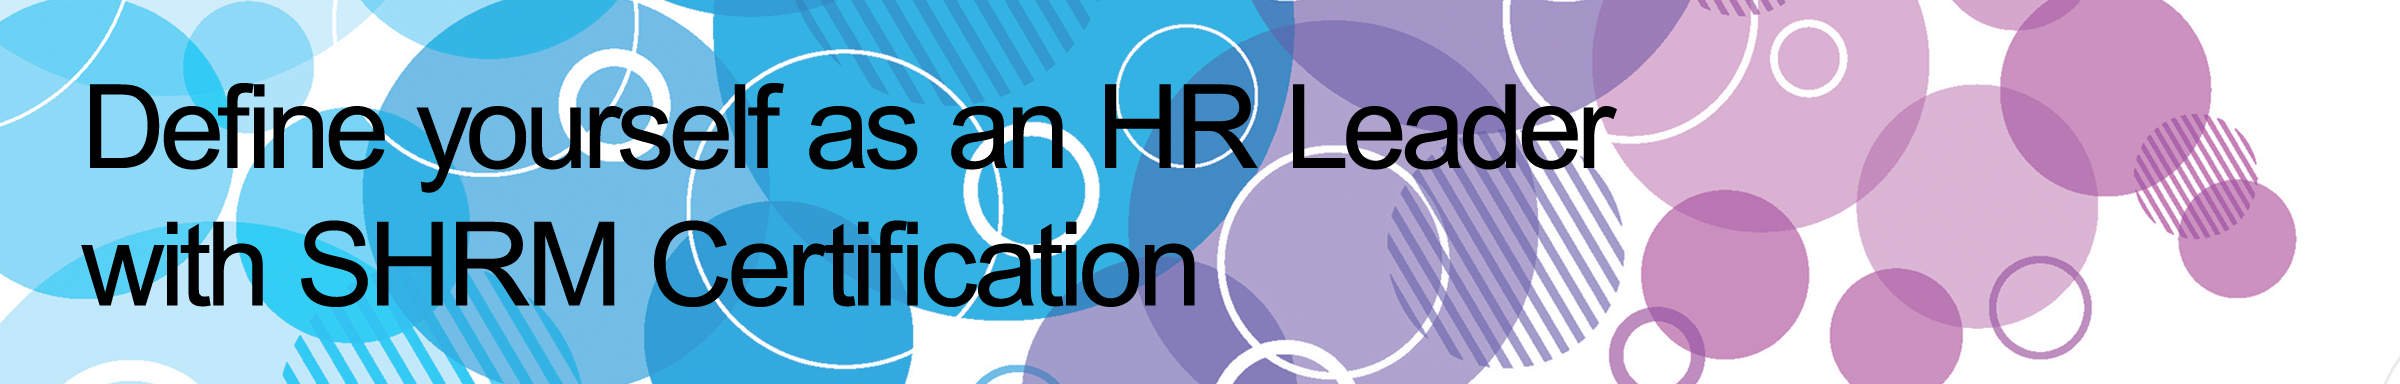 Define yourself as an HR Leader with SHRM Certification